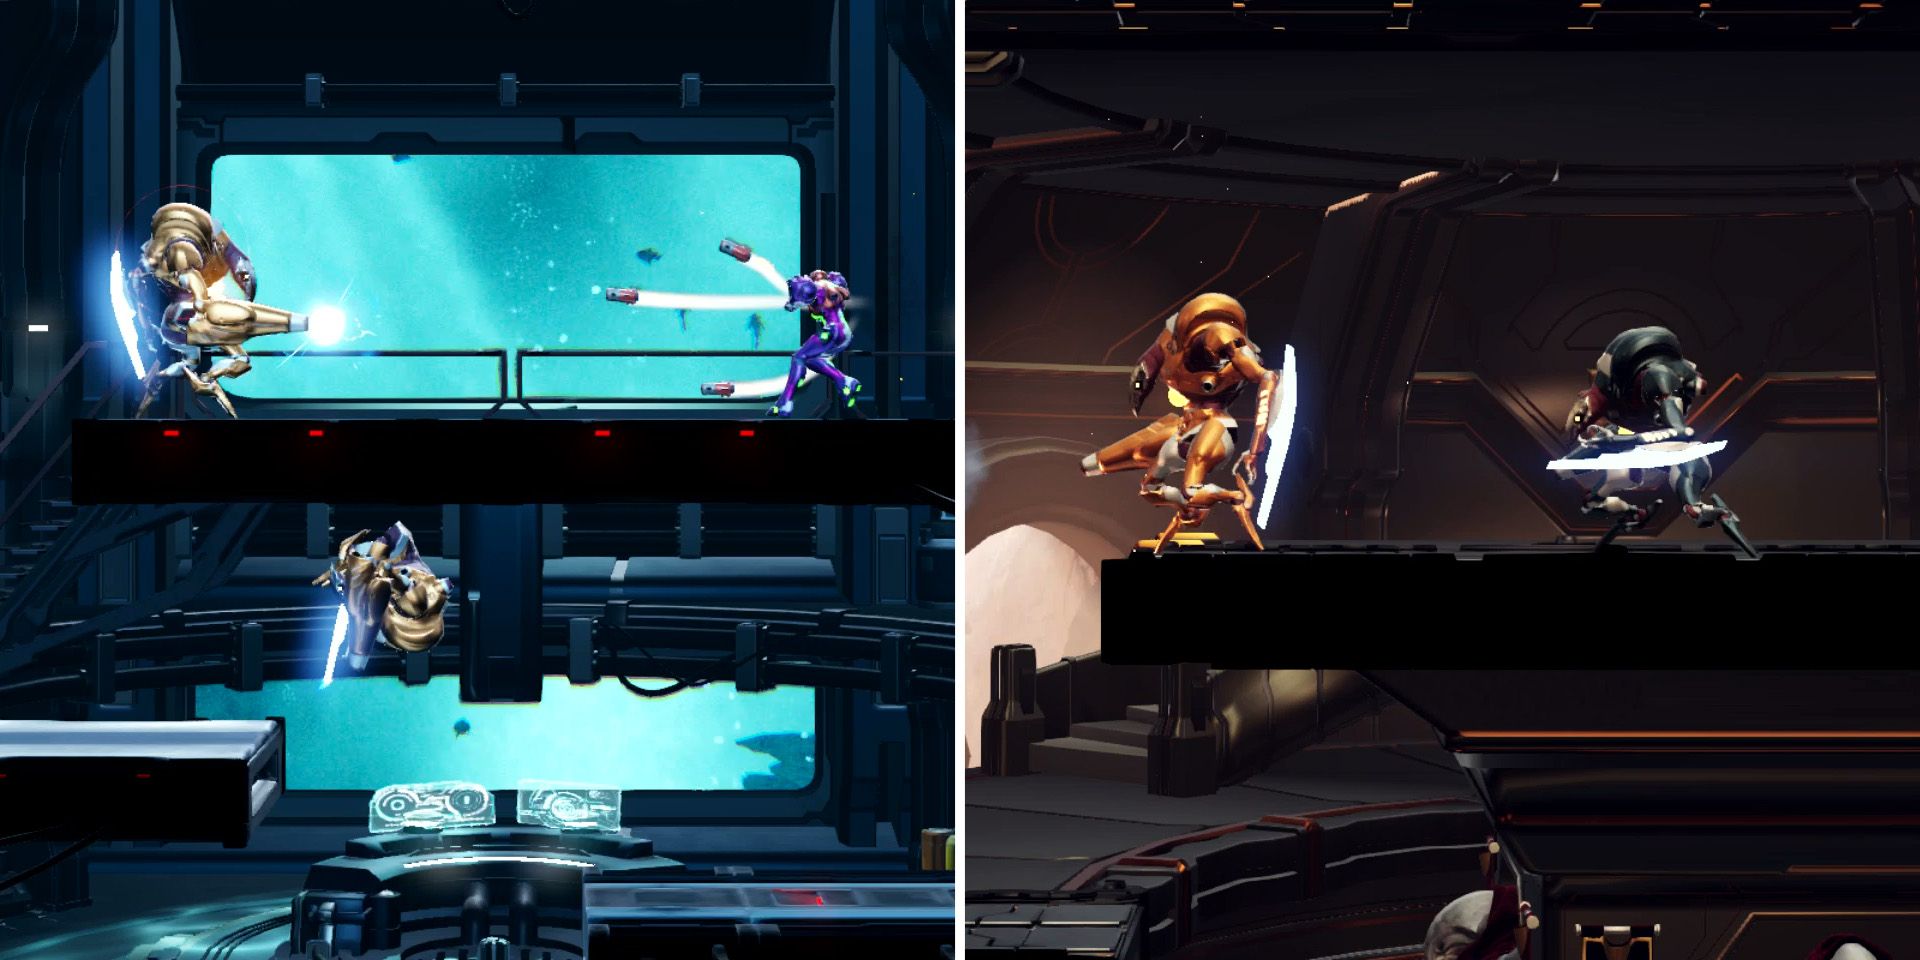 metroid-dread-twin-robot-chozo-soldier-boss-fight-00-featured-image